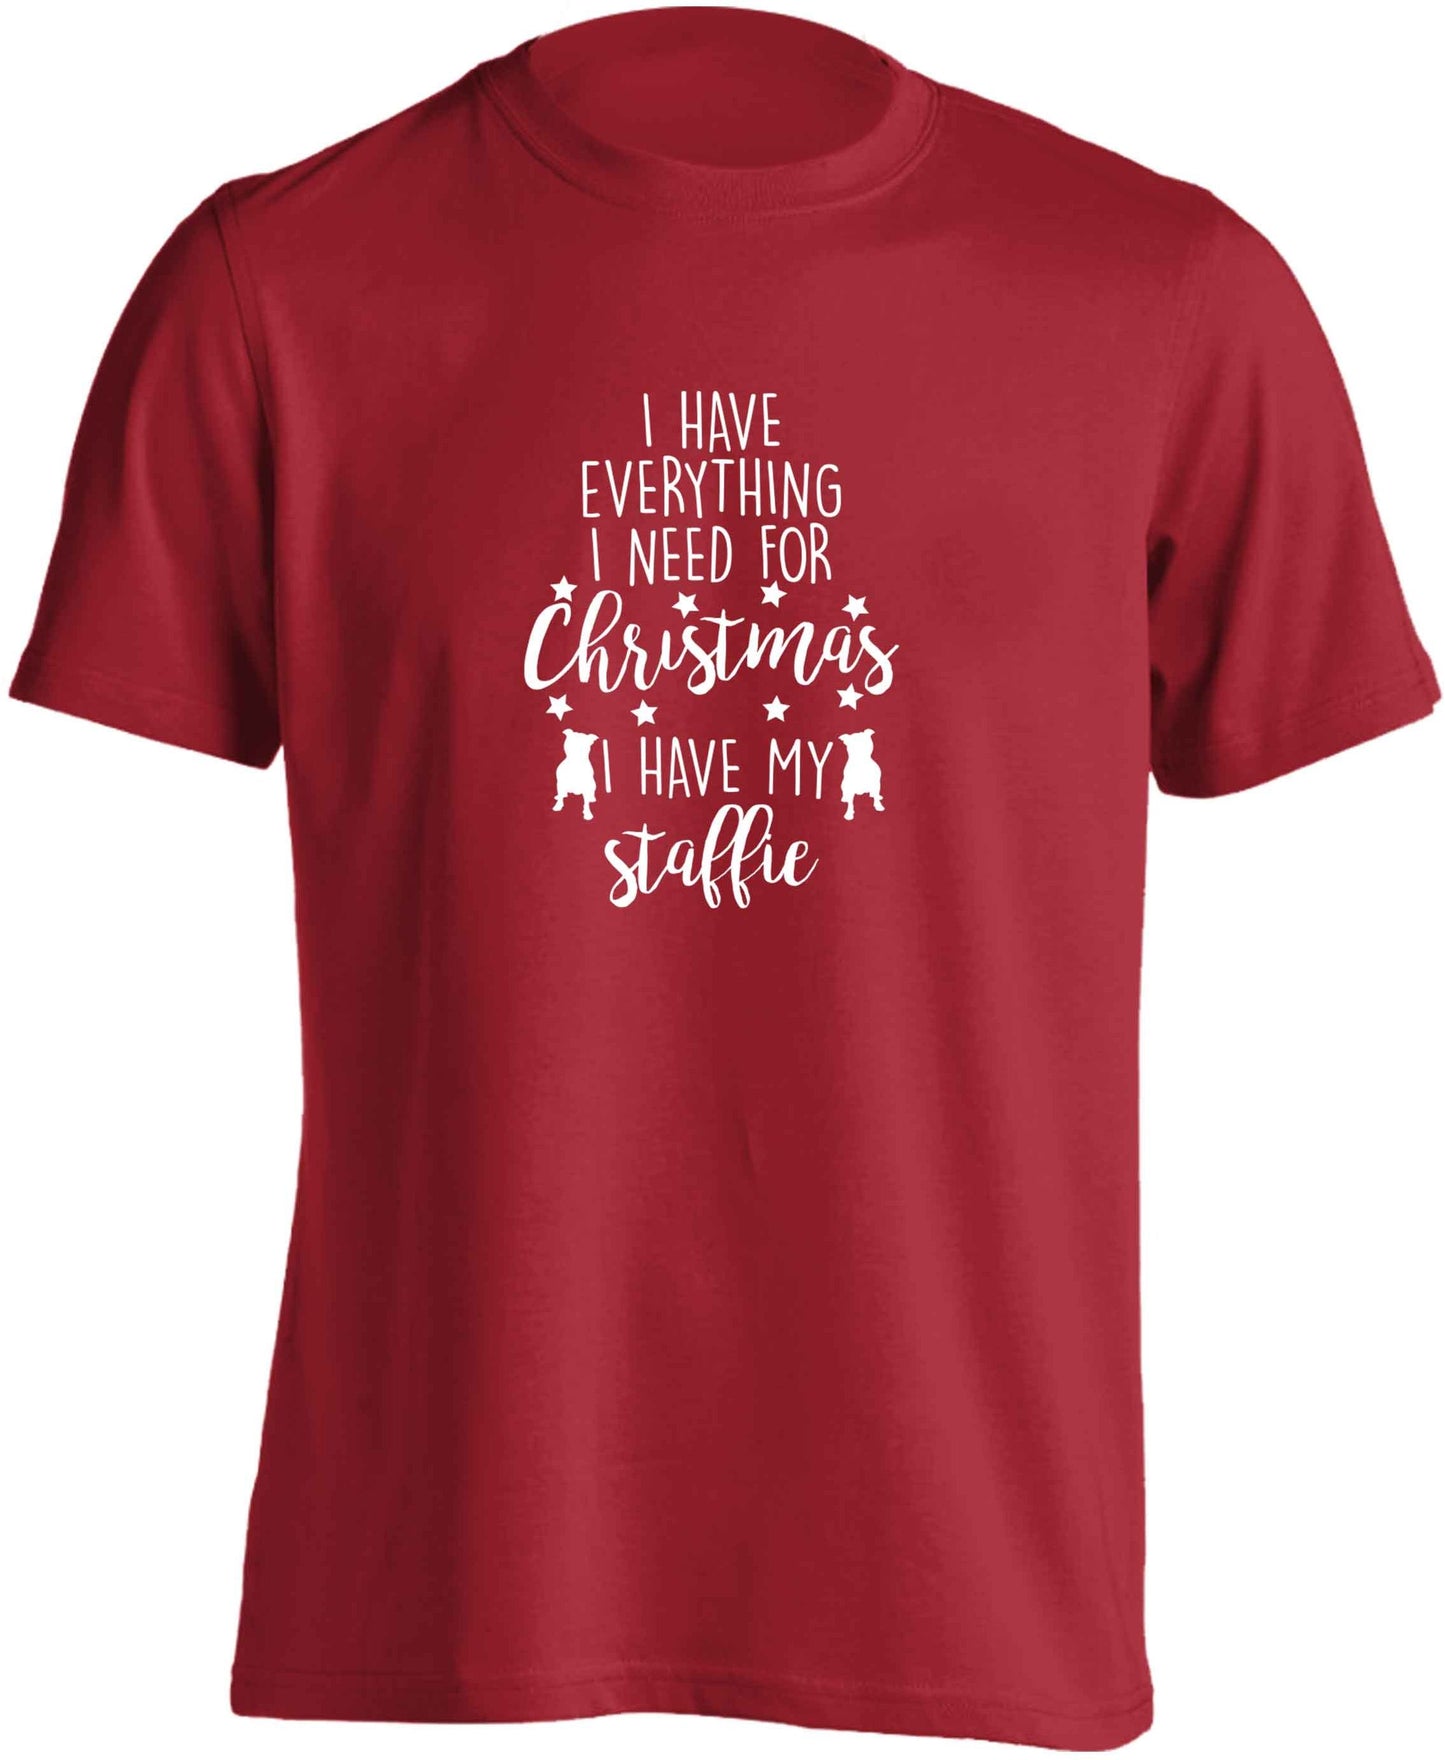 I have everything I need for Christmas I have my staffie adults unisex red Tshirt 2XL